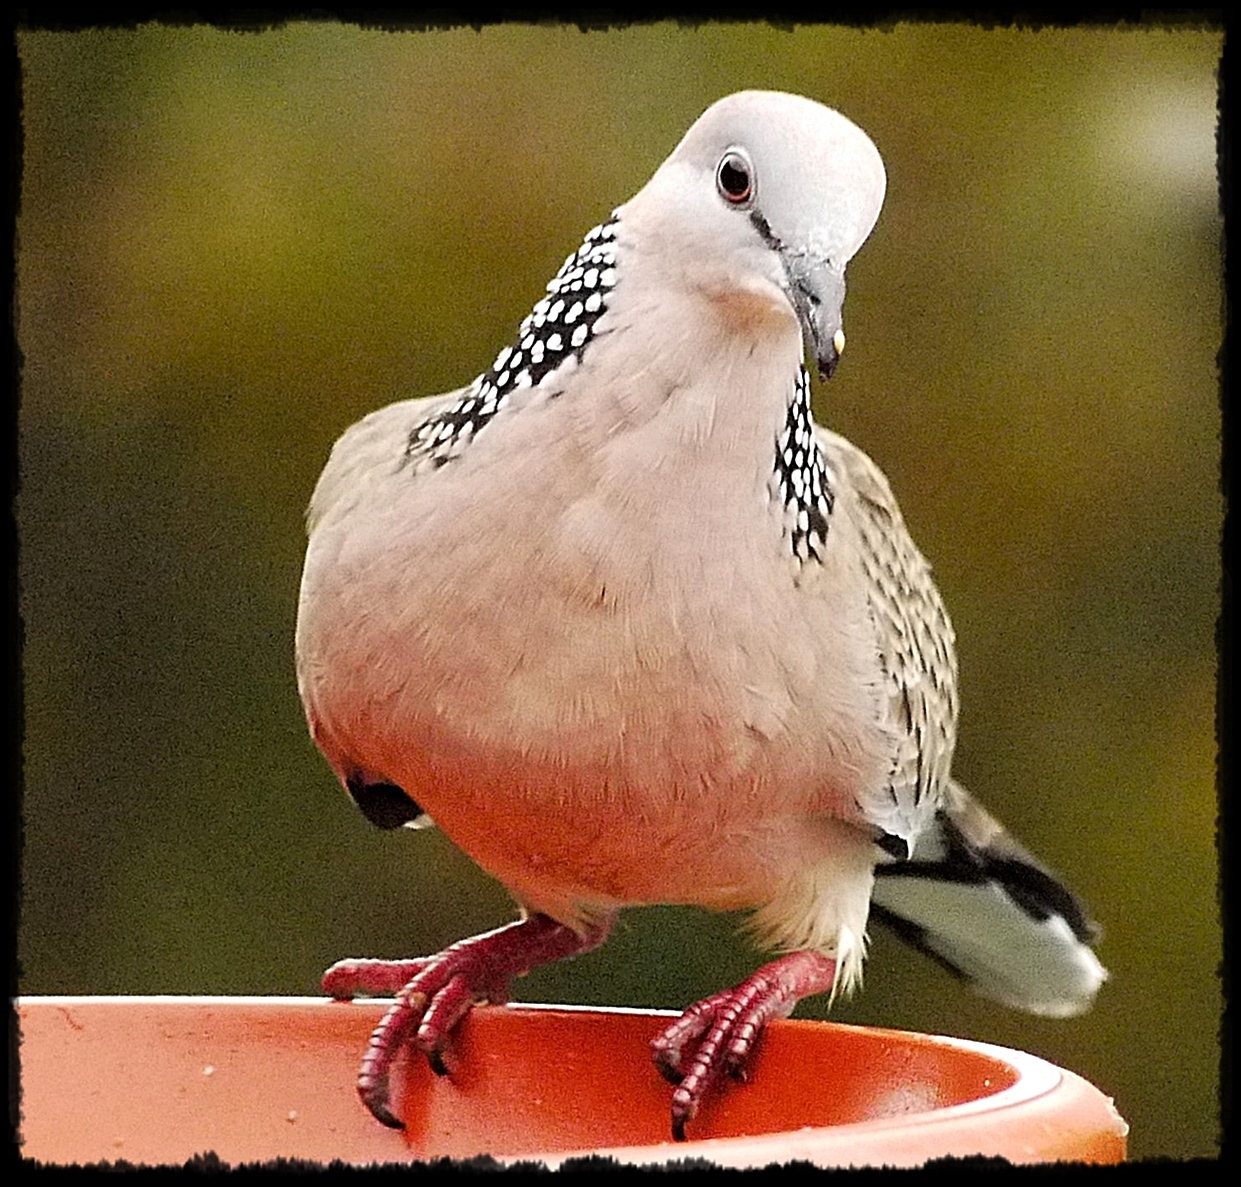 Spotted Dove...